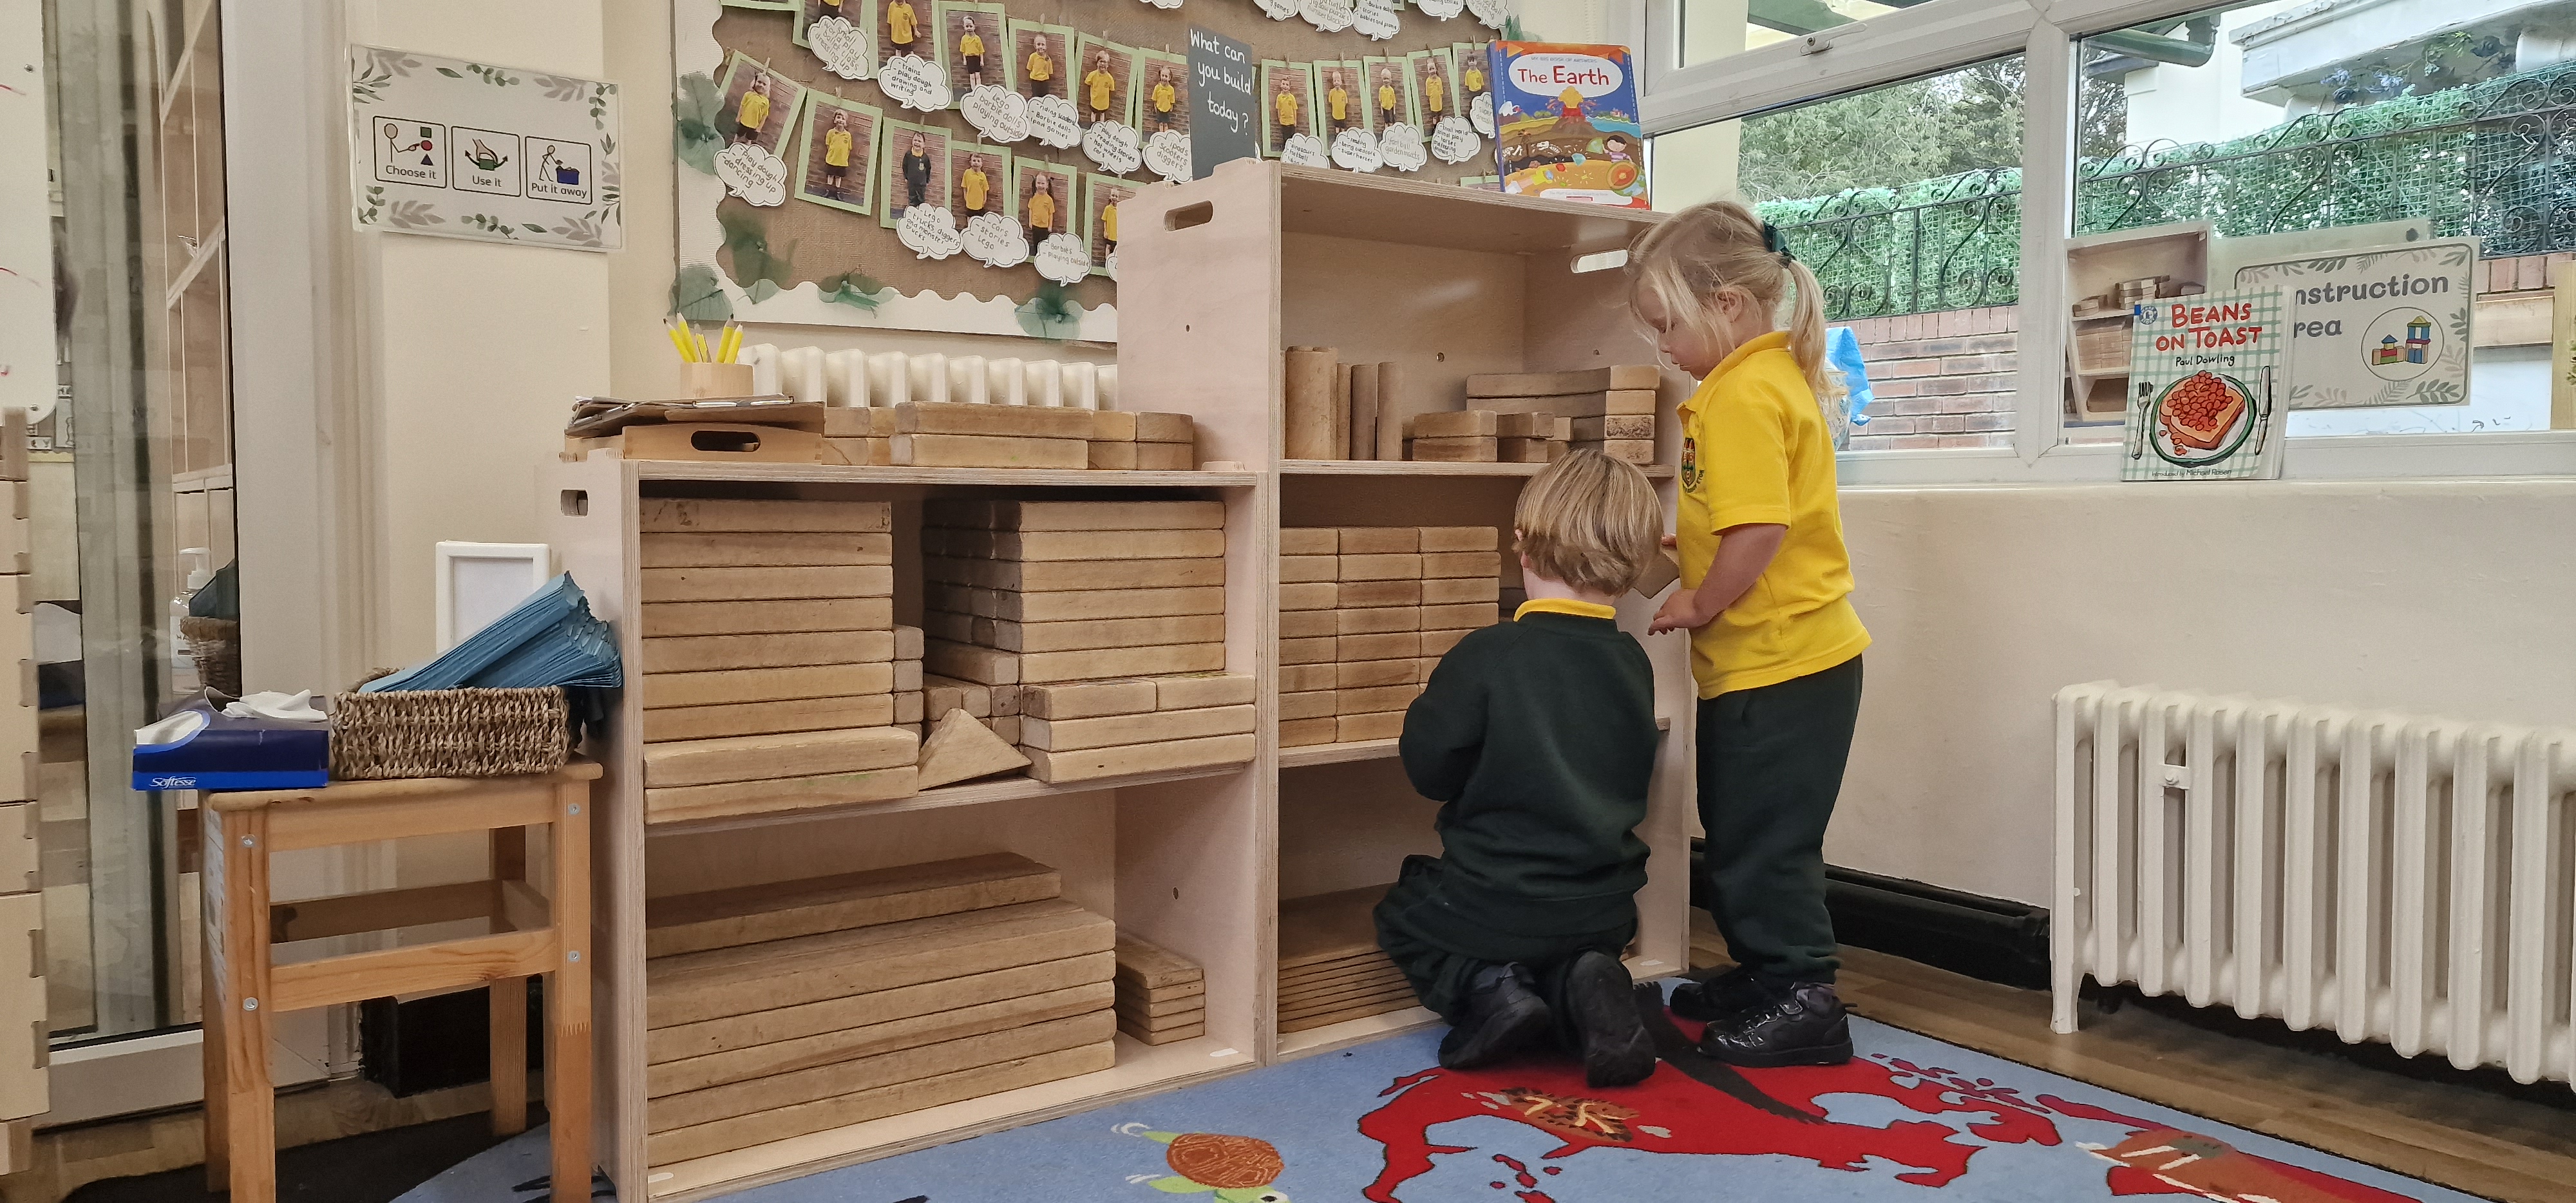 An image showing two children looking at the storage unit with shelves we provided. This storage unit is holding wooden blocks.